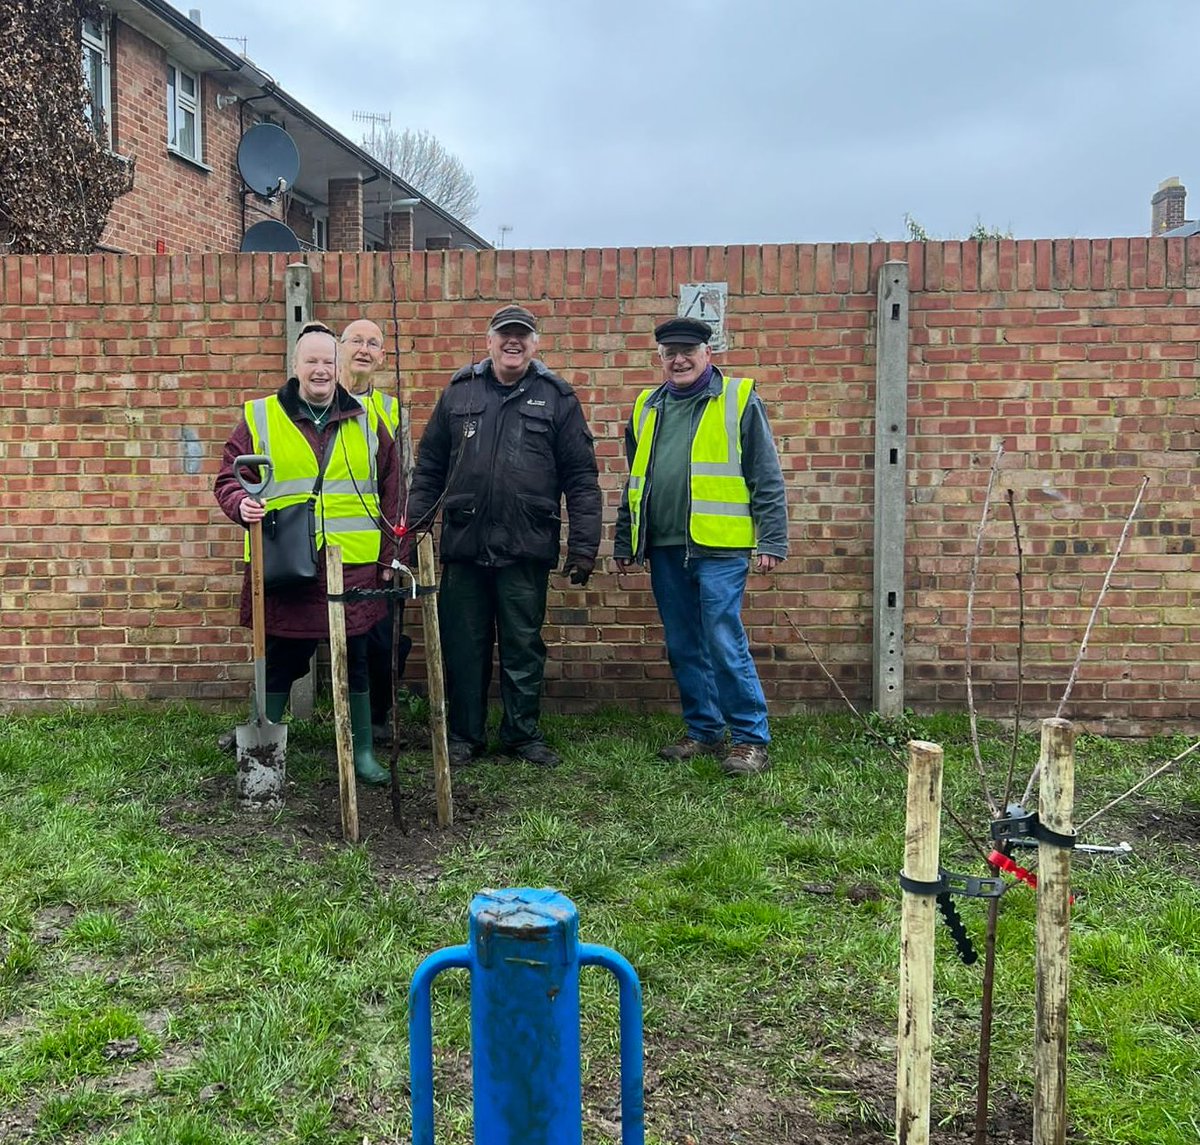 10 fruit trees planted on 18 March at Sydney House and King Street with Cllrs Kirsty Mellor, Yinka Adeniram and Cal Corkery, Ian Turner of the Tree Council Major Tree Projects lent a hand as did Tracey from the Stacey Centre garden. Good effort!